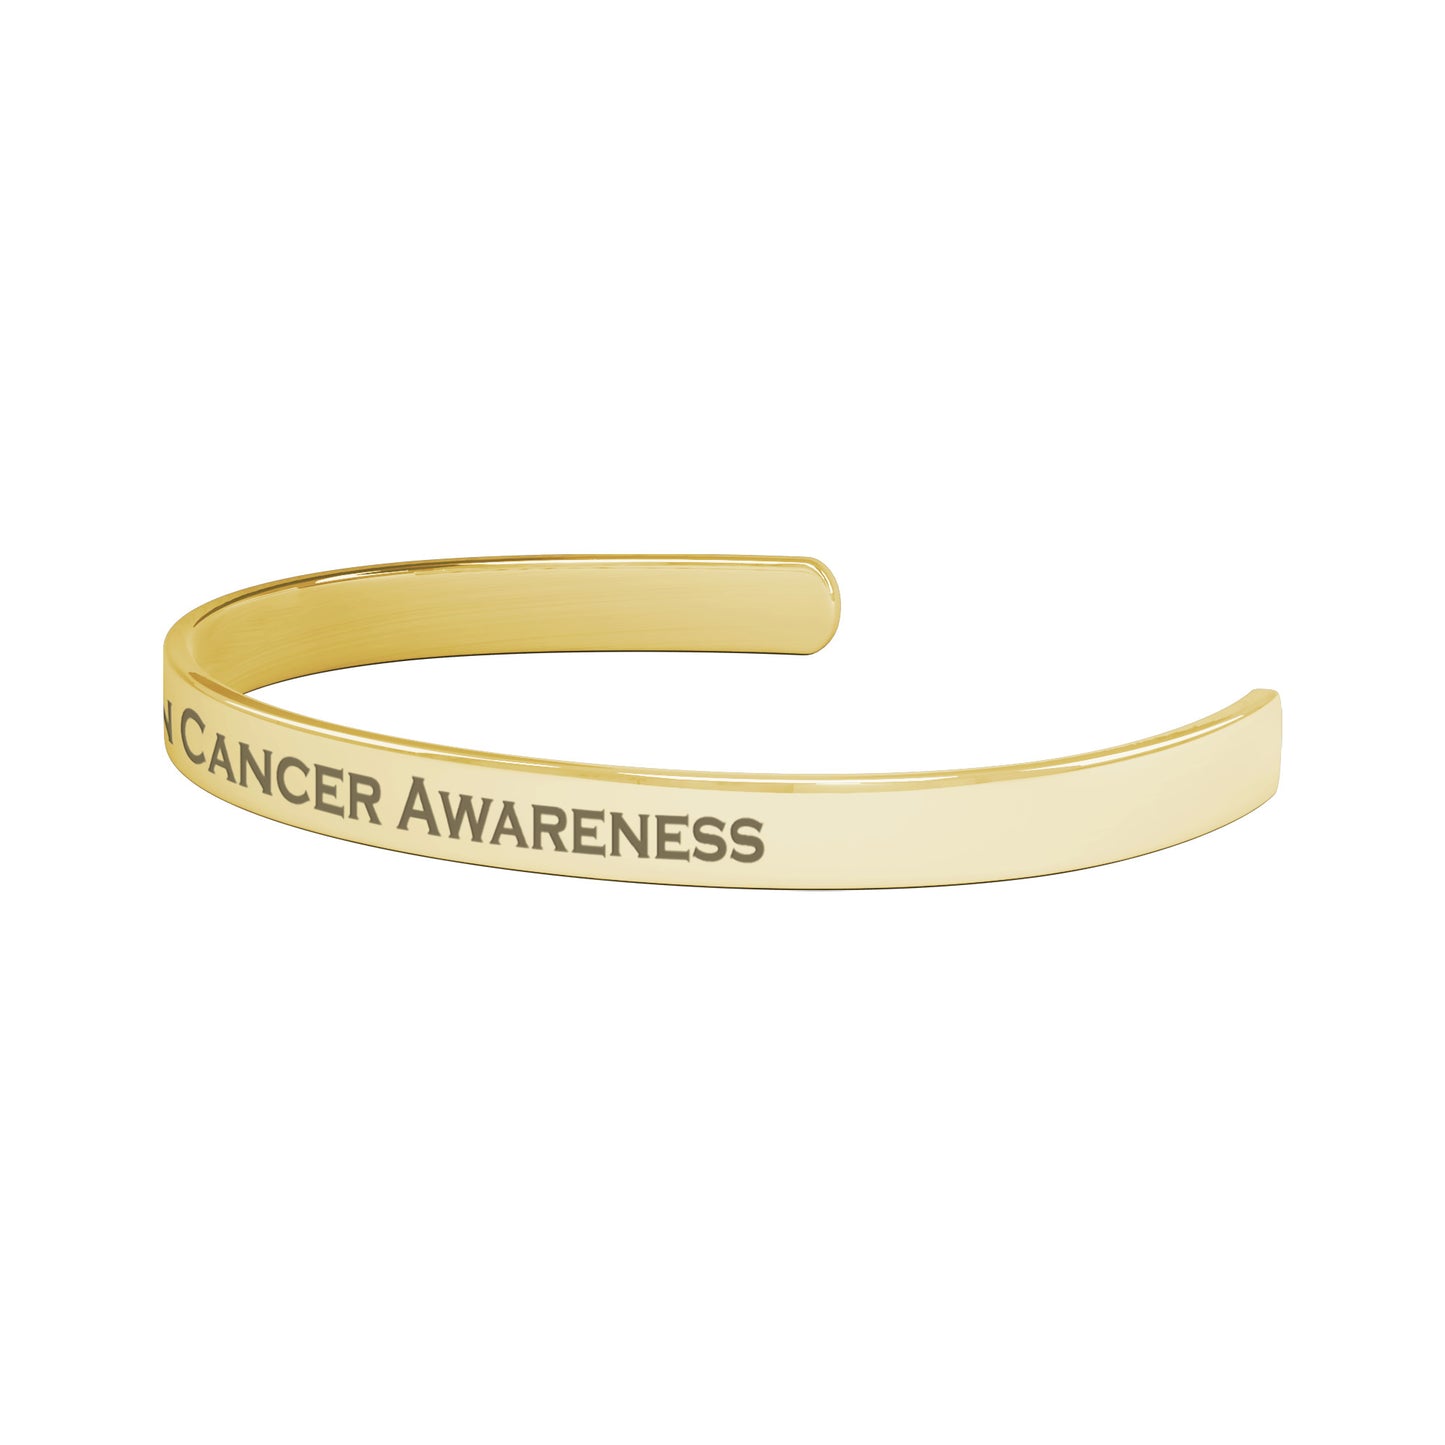 Personalized Ovarian Cancer Awareness Cuff Bracelet